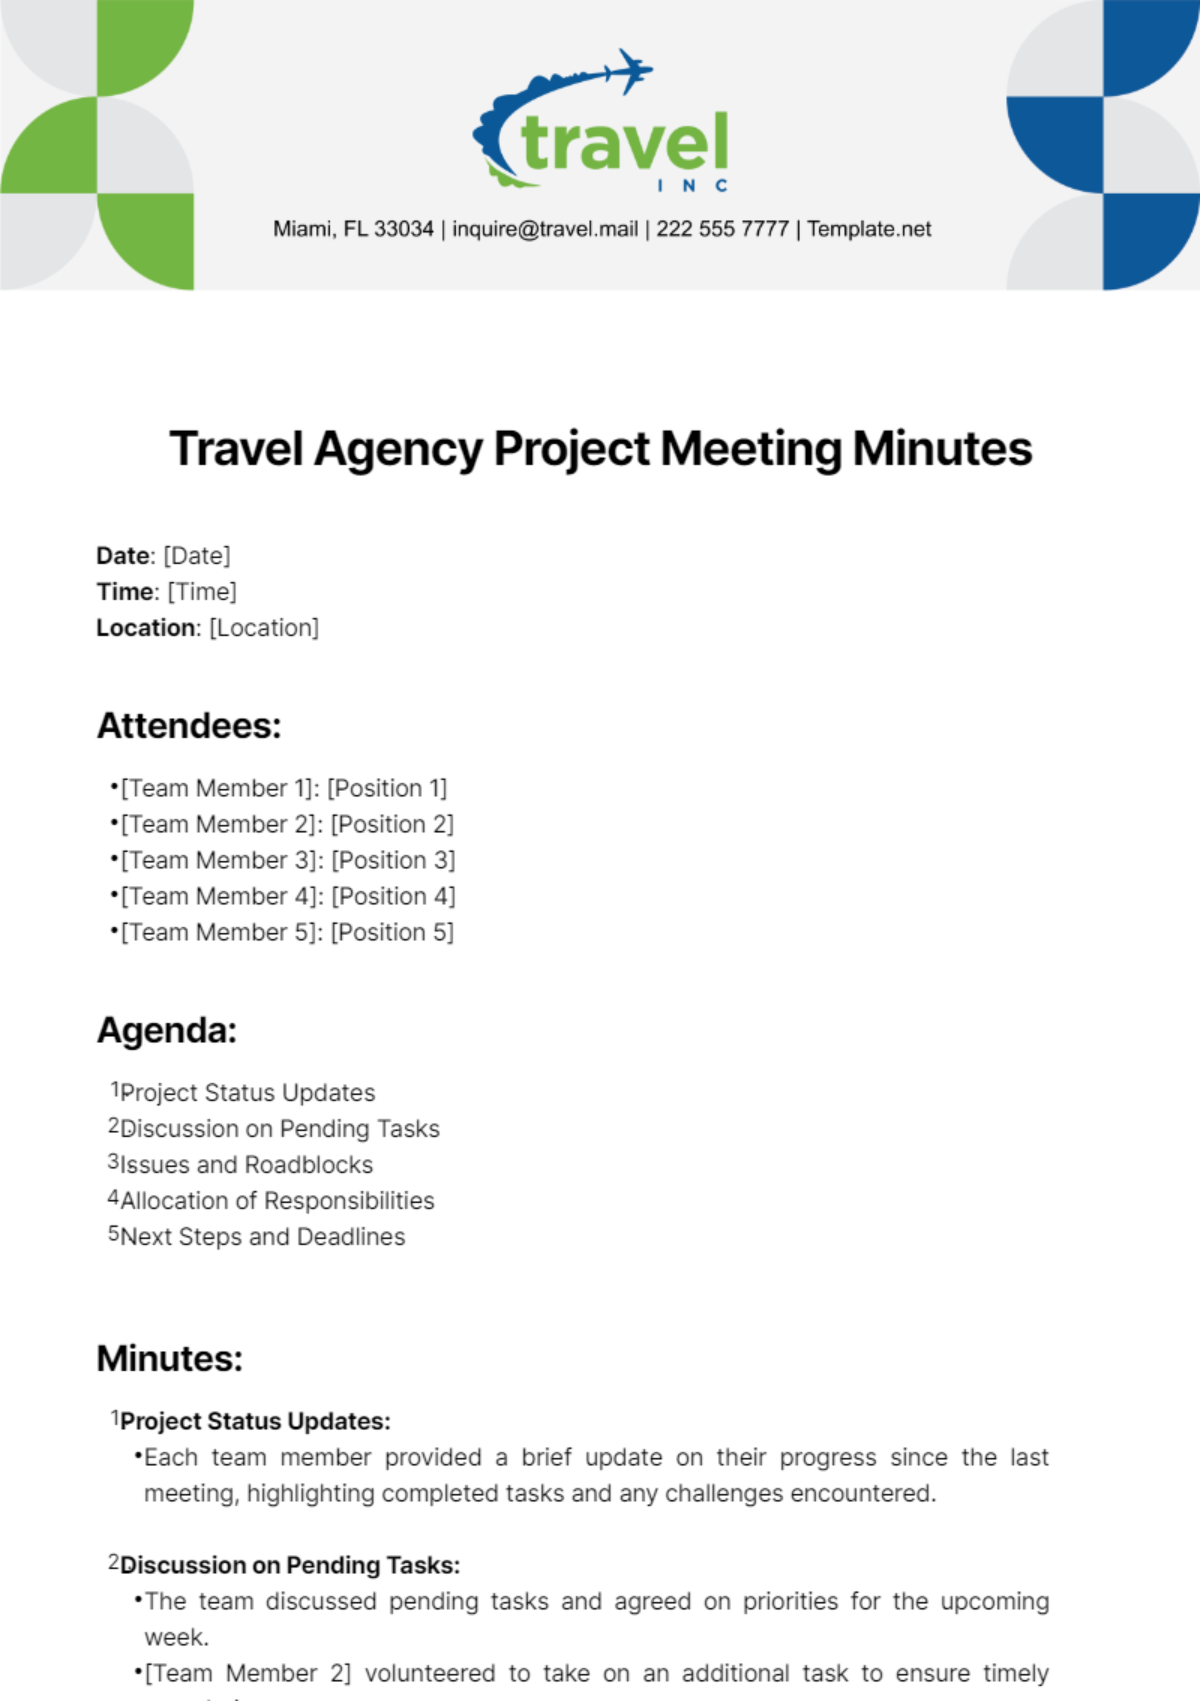 Travel Agency Project Meeting Minutes Template